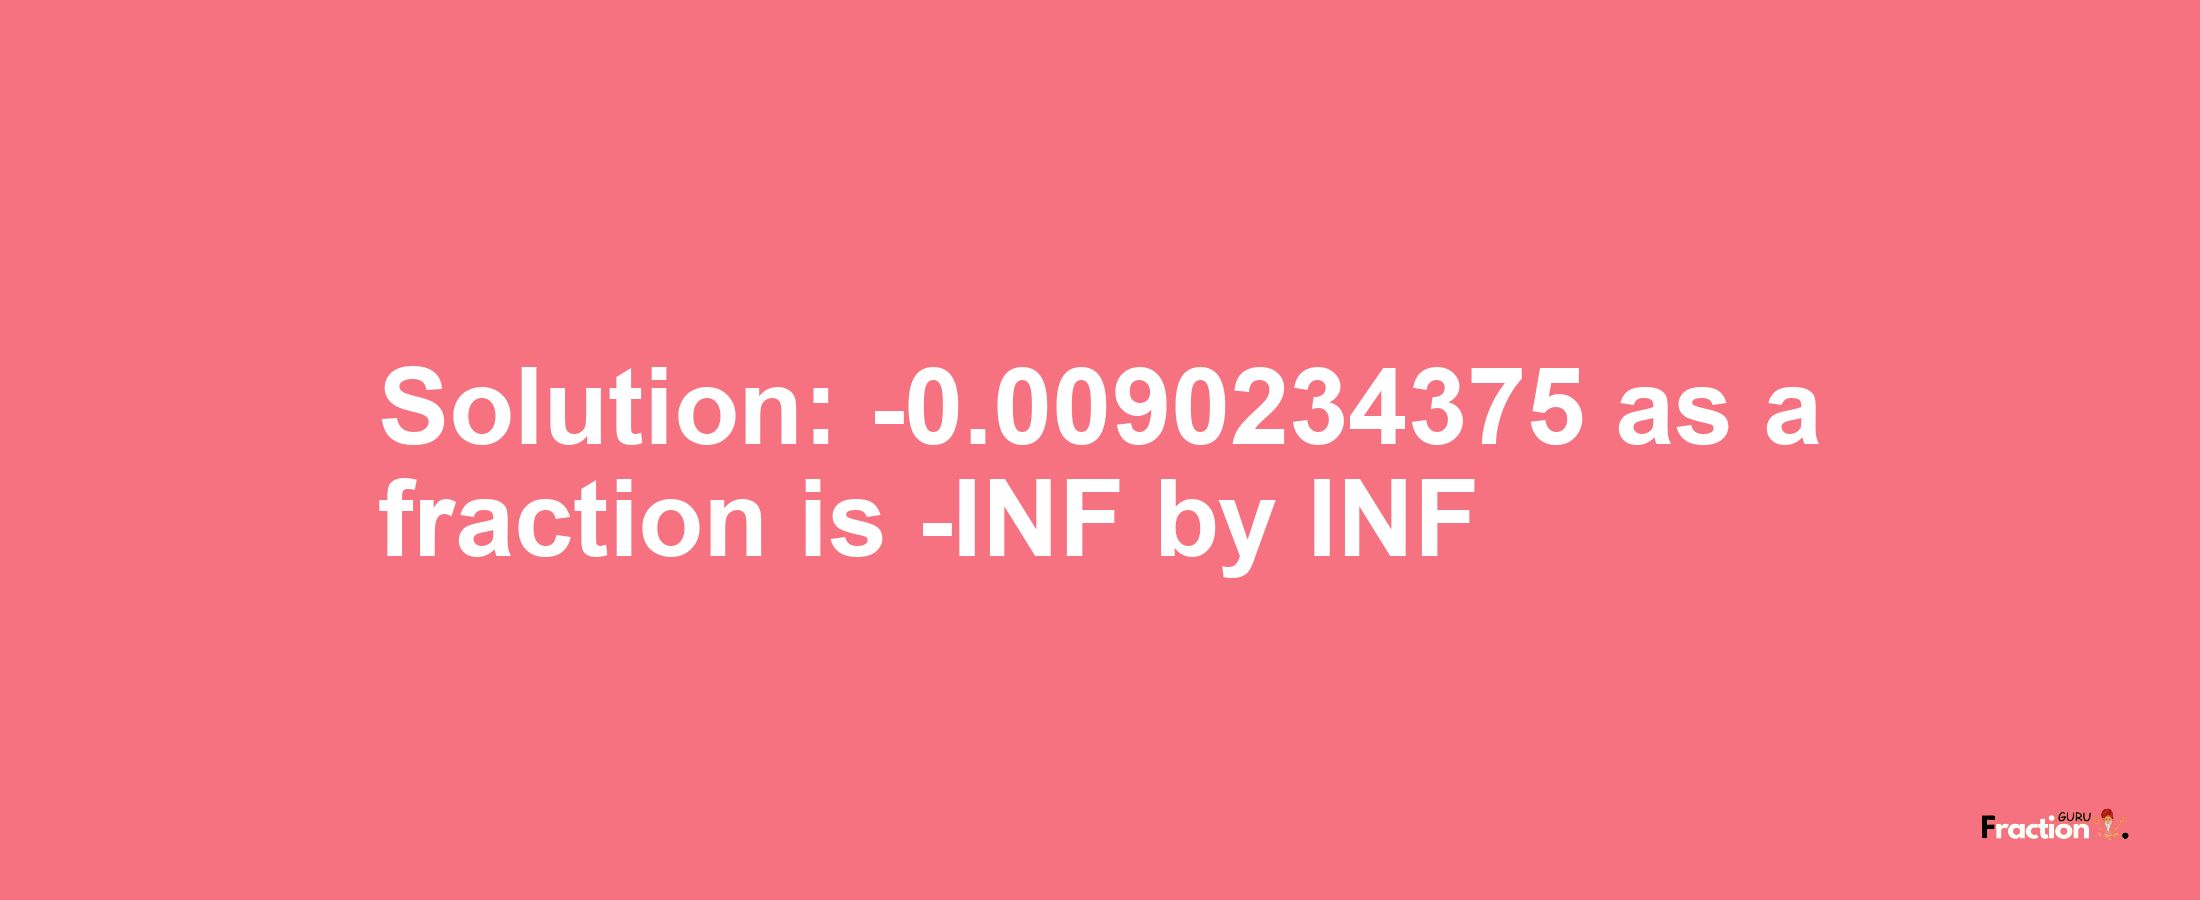 Solution:-0.0090234375 as a fraction is -INF/INF